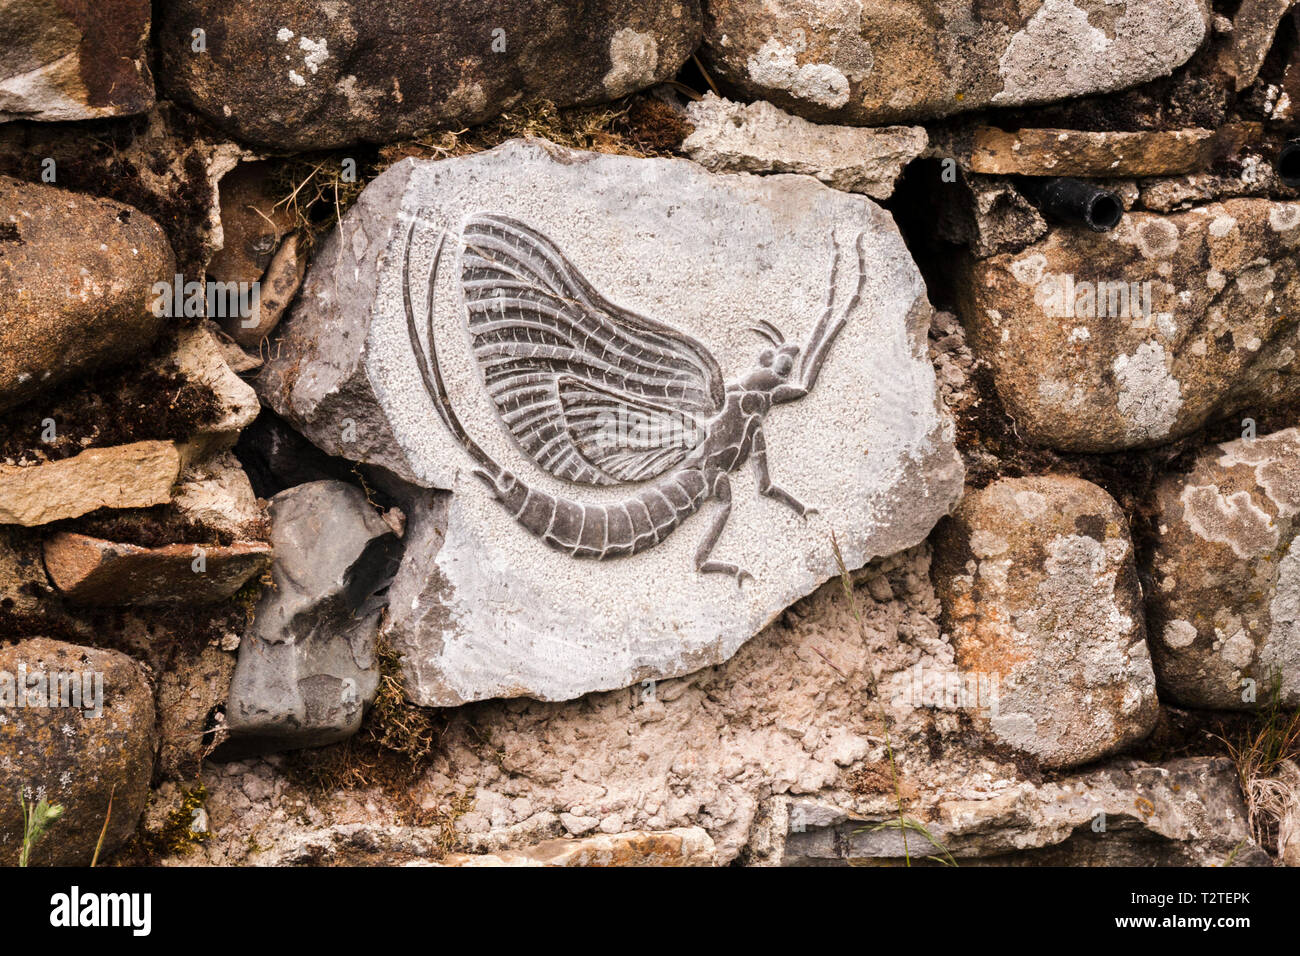 Mayfly sculptures on stone panels that have been worked into drystone walls along Upper Teesdale near Low Force waterfalls Stock Photo